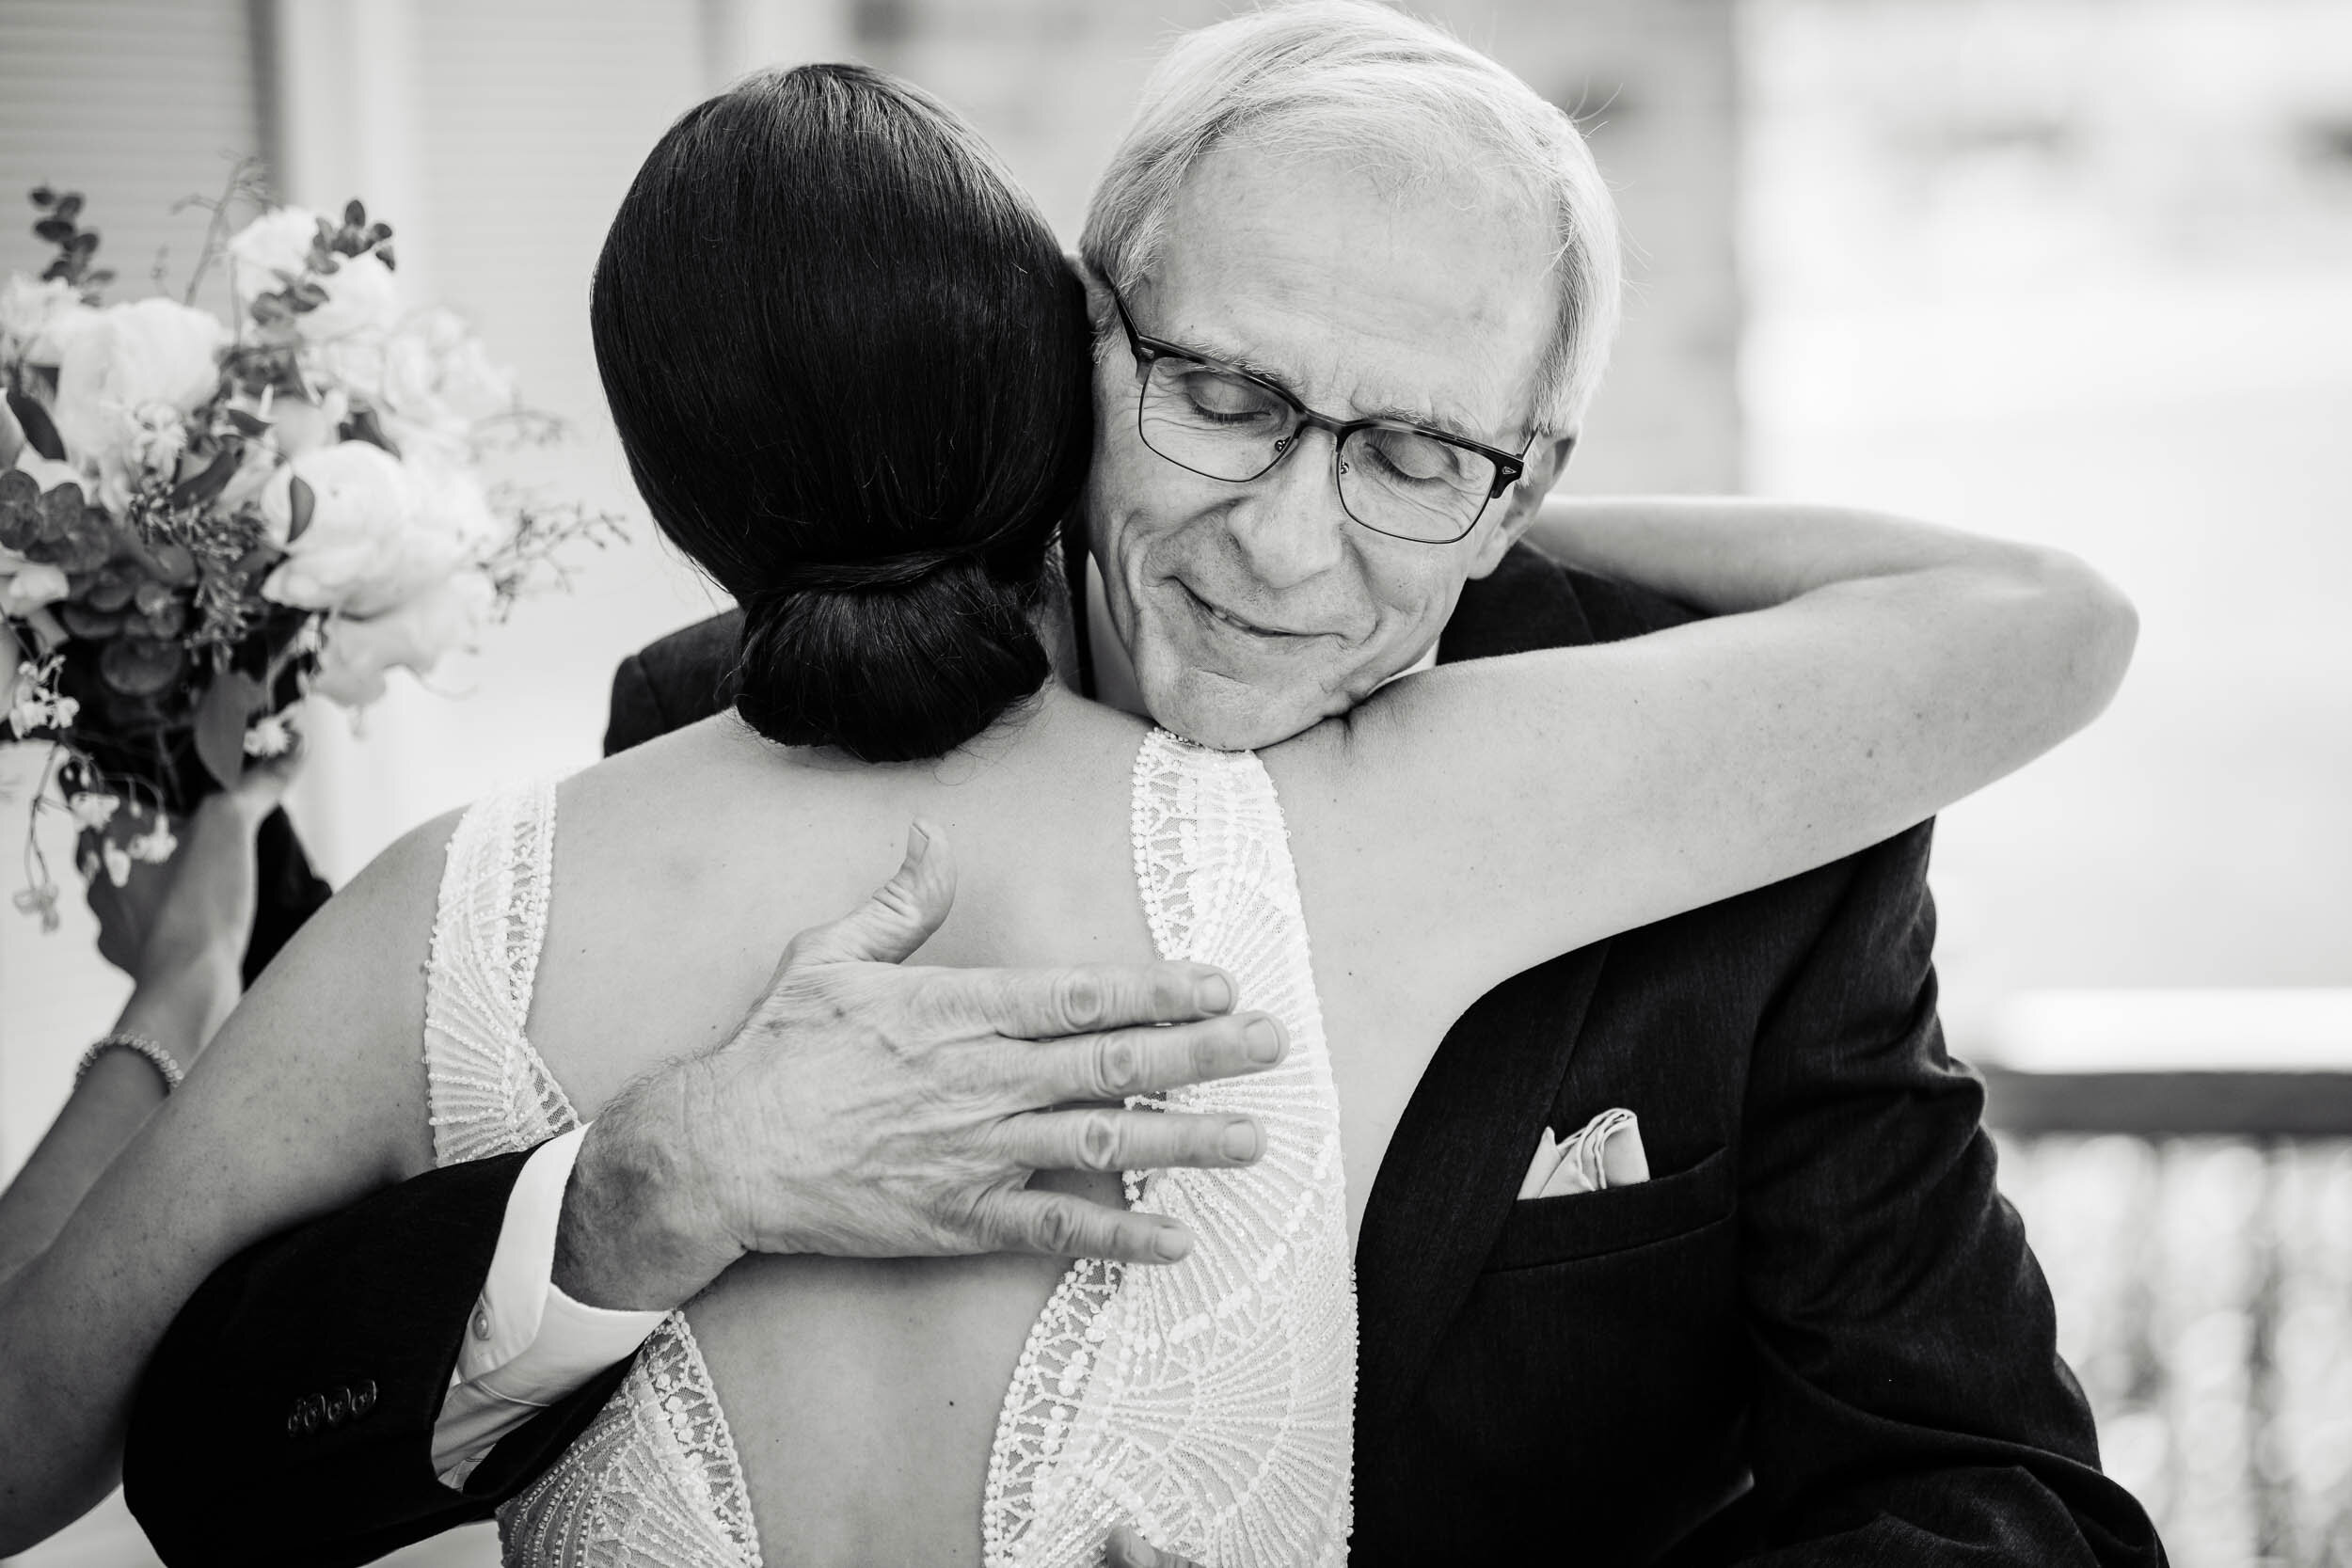 Father and daughter hug before the ceremony: Chicago wedding photography by J. Brown Photography.